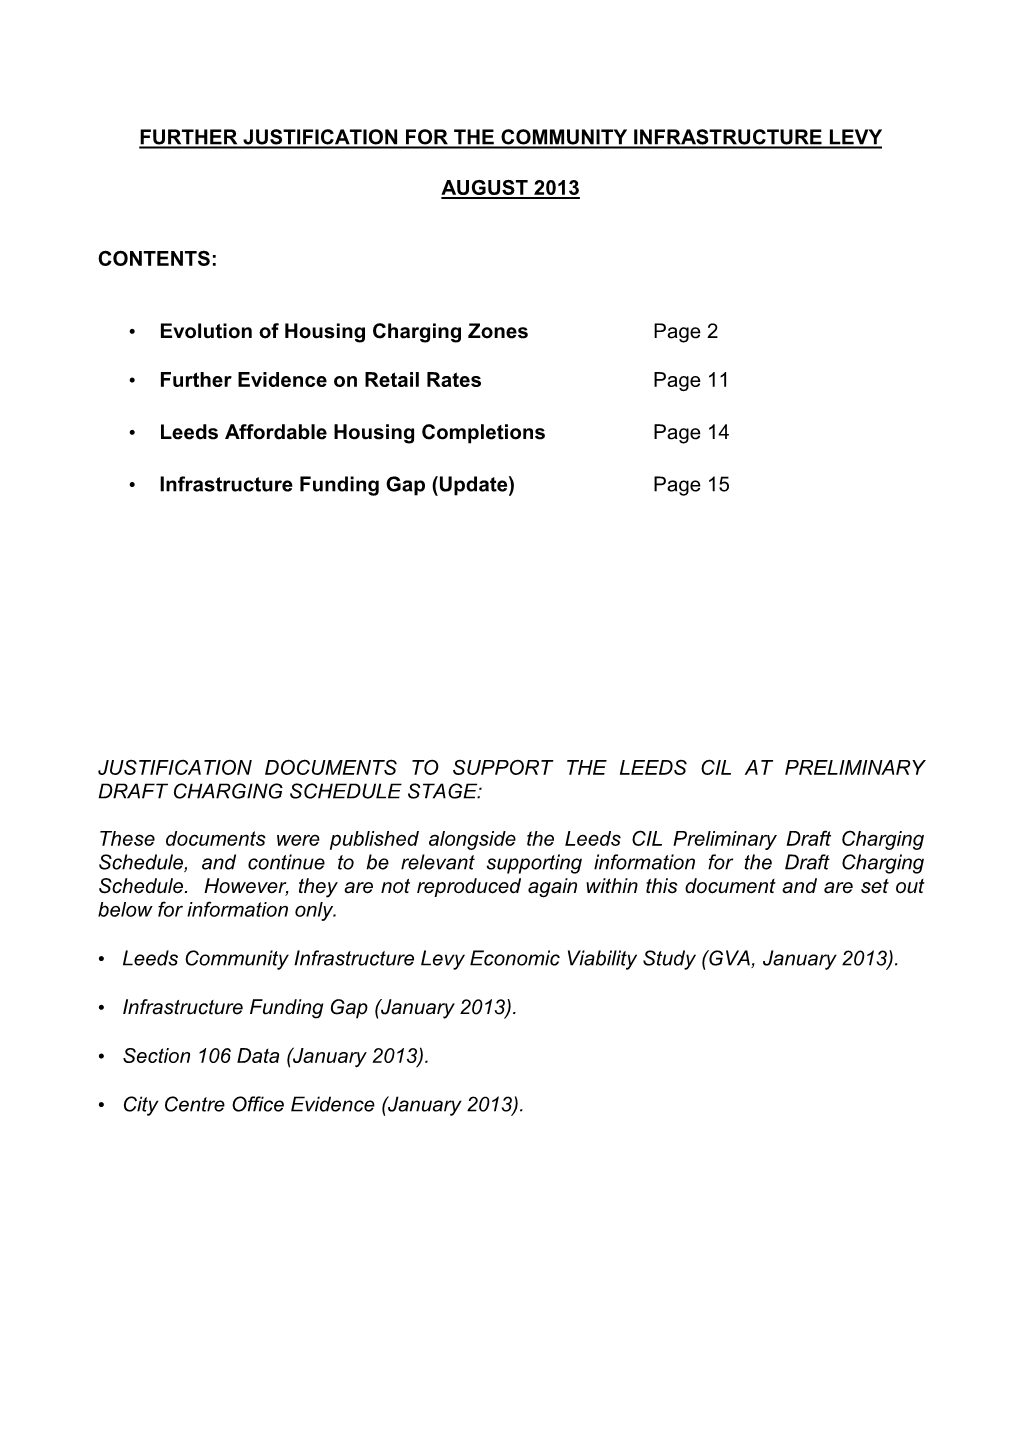 Evolution of Housing Charging Zones Page 2